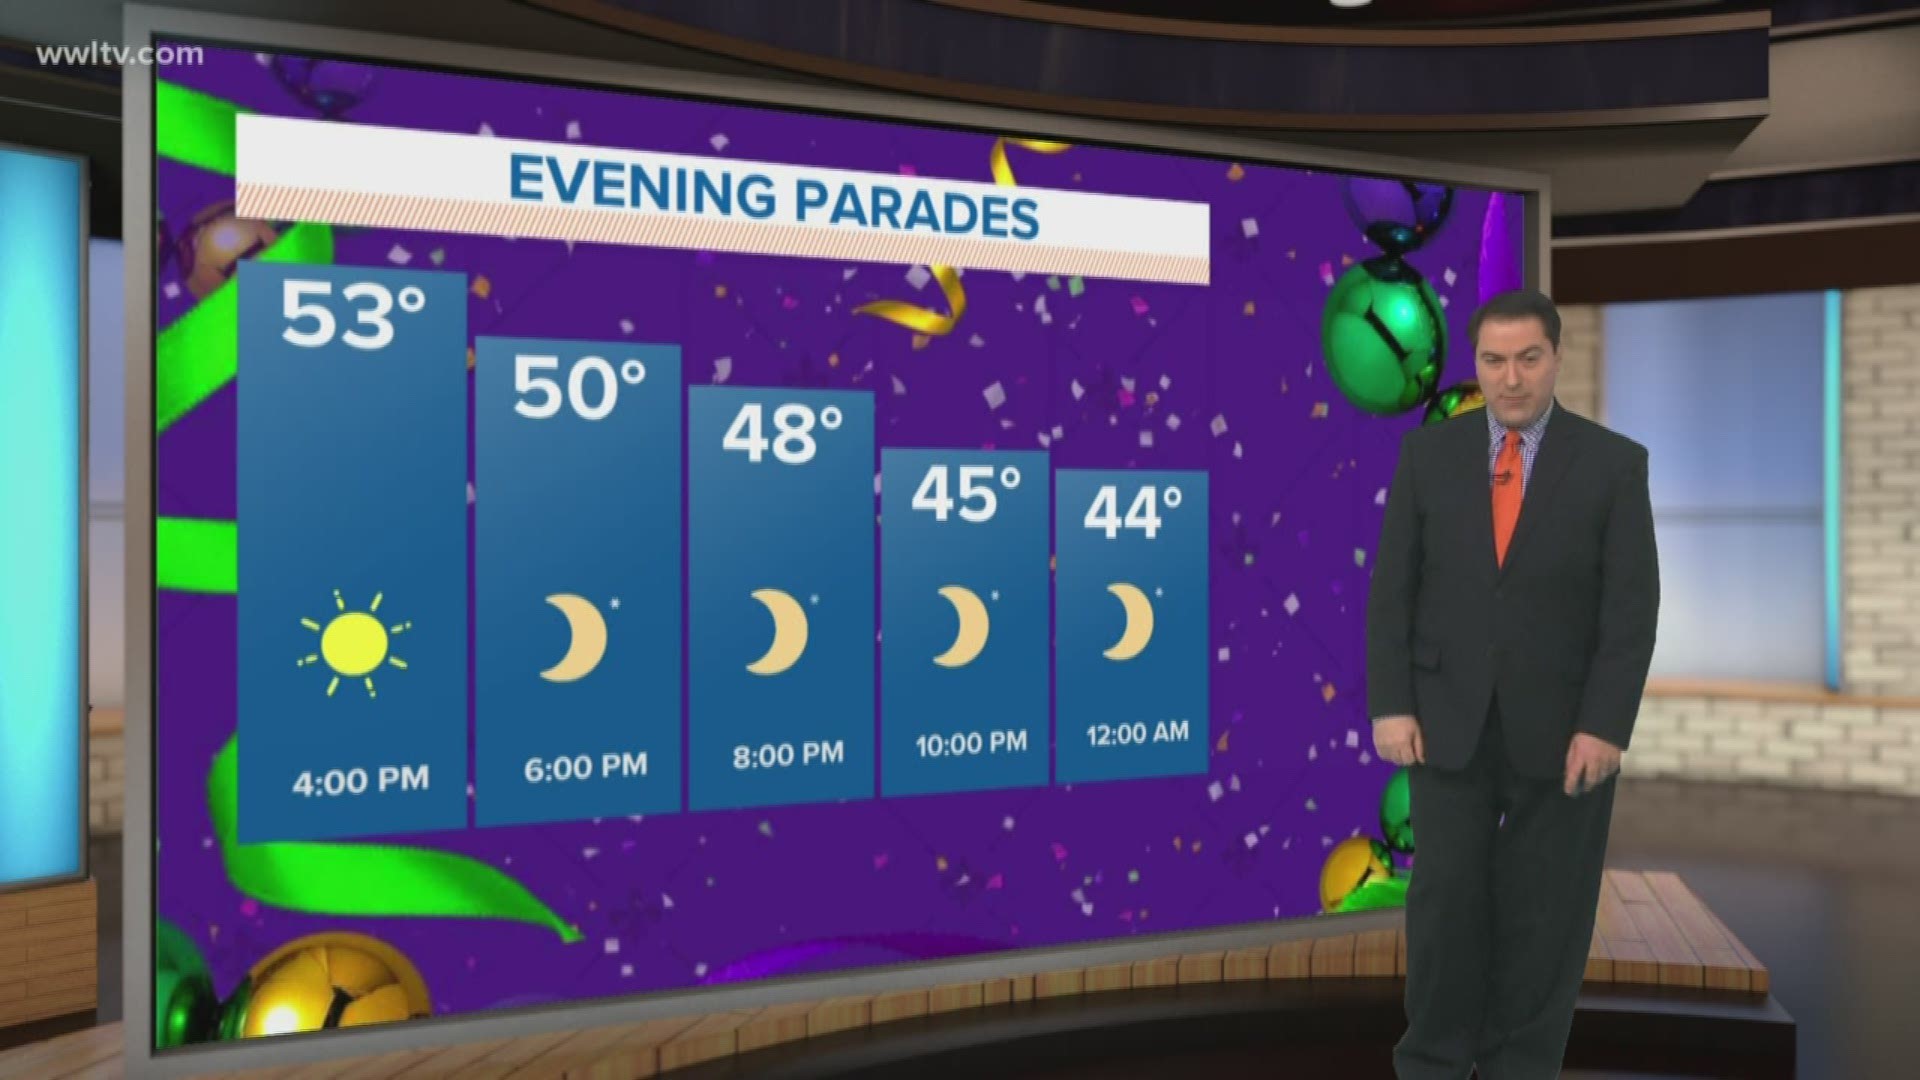 Five parades on tap for tonight, you'll want to bundle up!